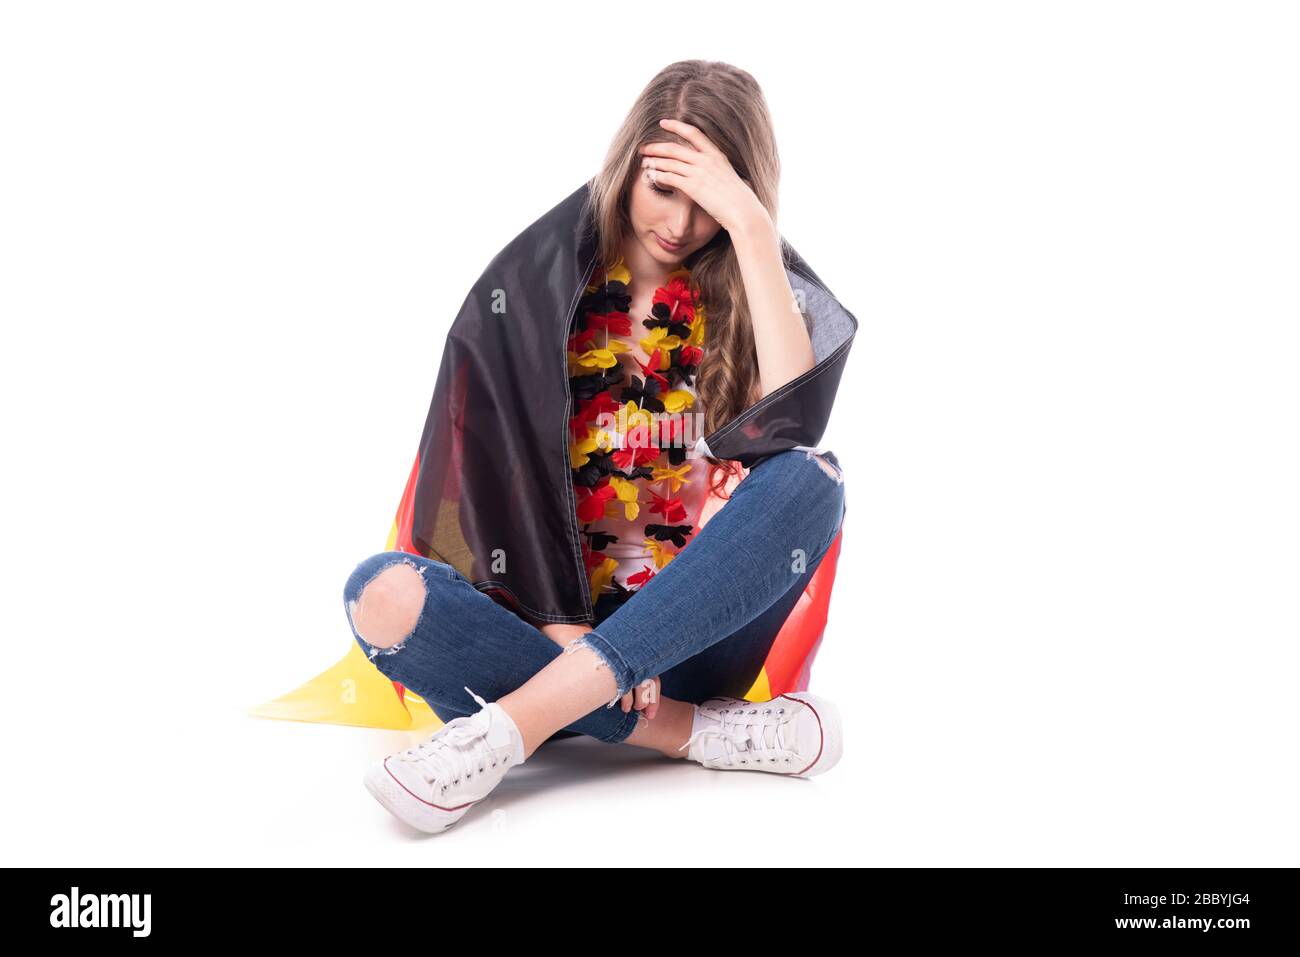 Sad Germany fan cries after the team has lost Stock Photo